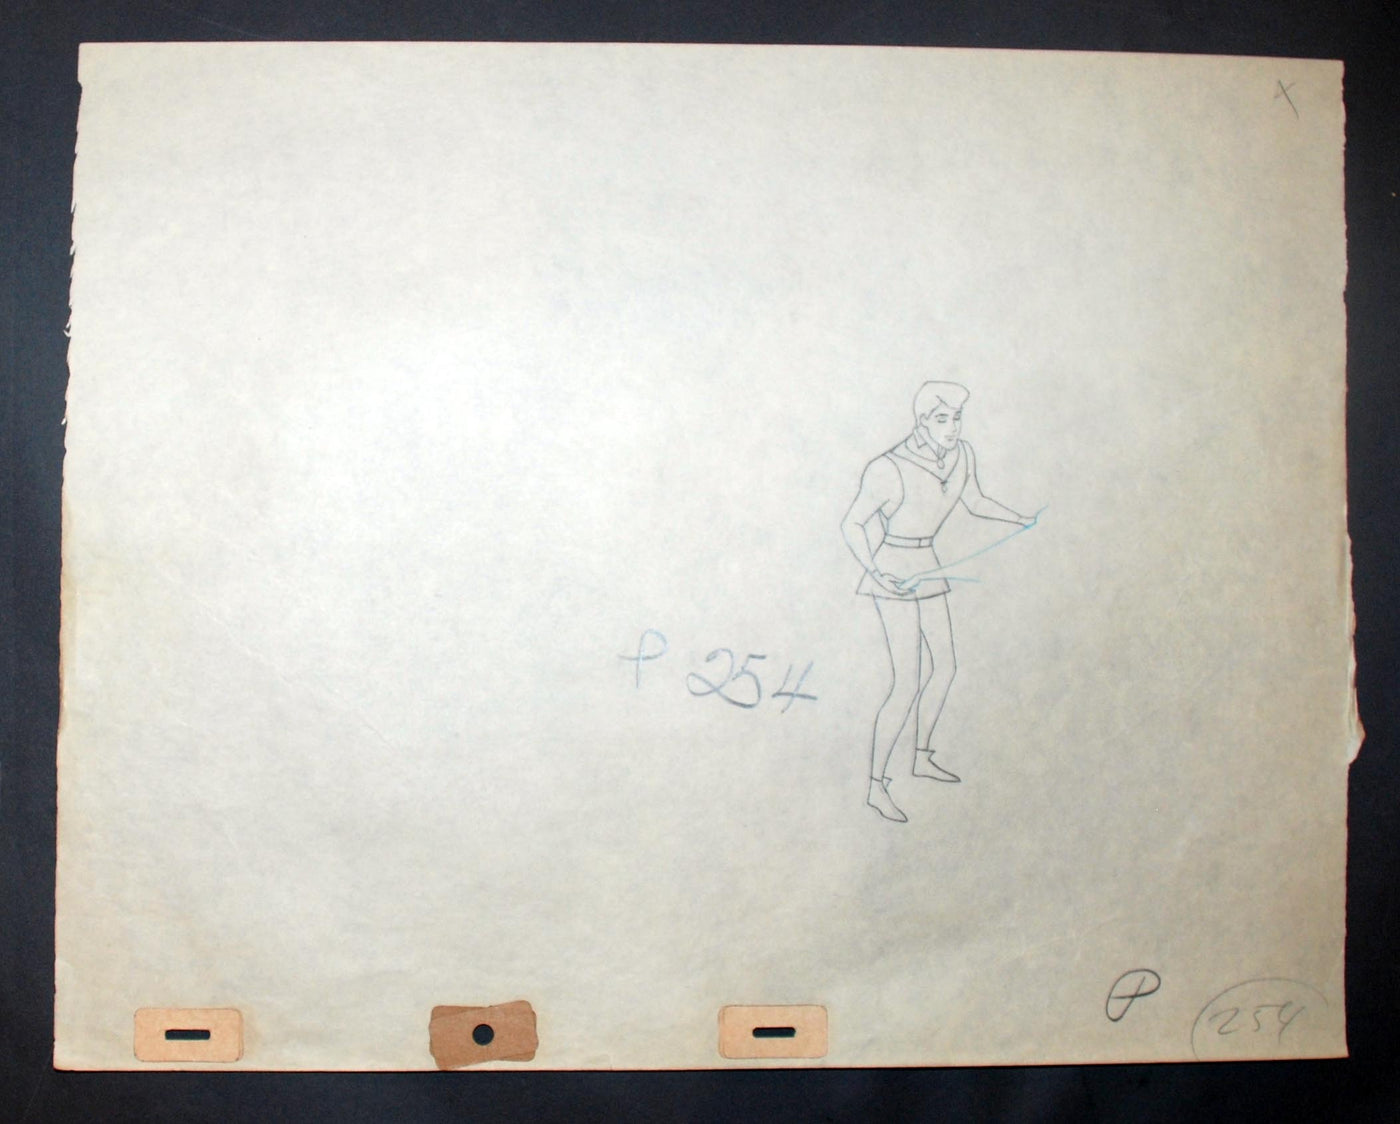 Original Walt Disney Production Drawing from Sleeping Beauty featuring Prince Phillip